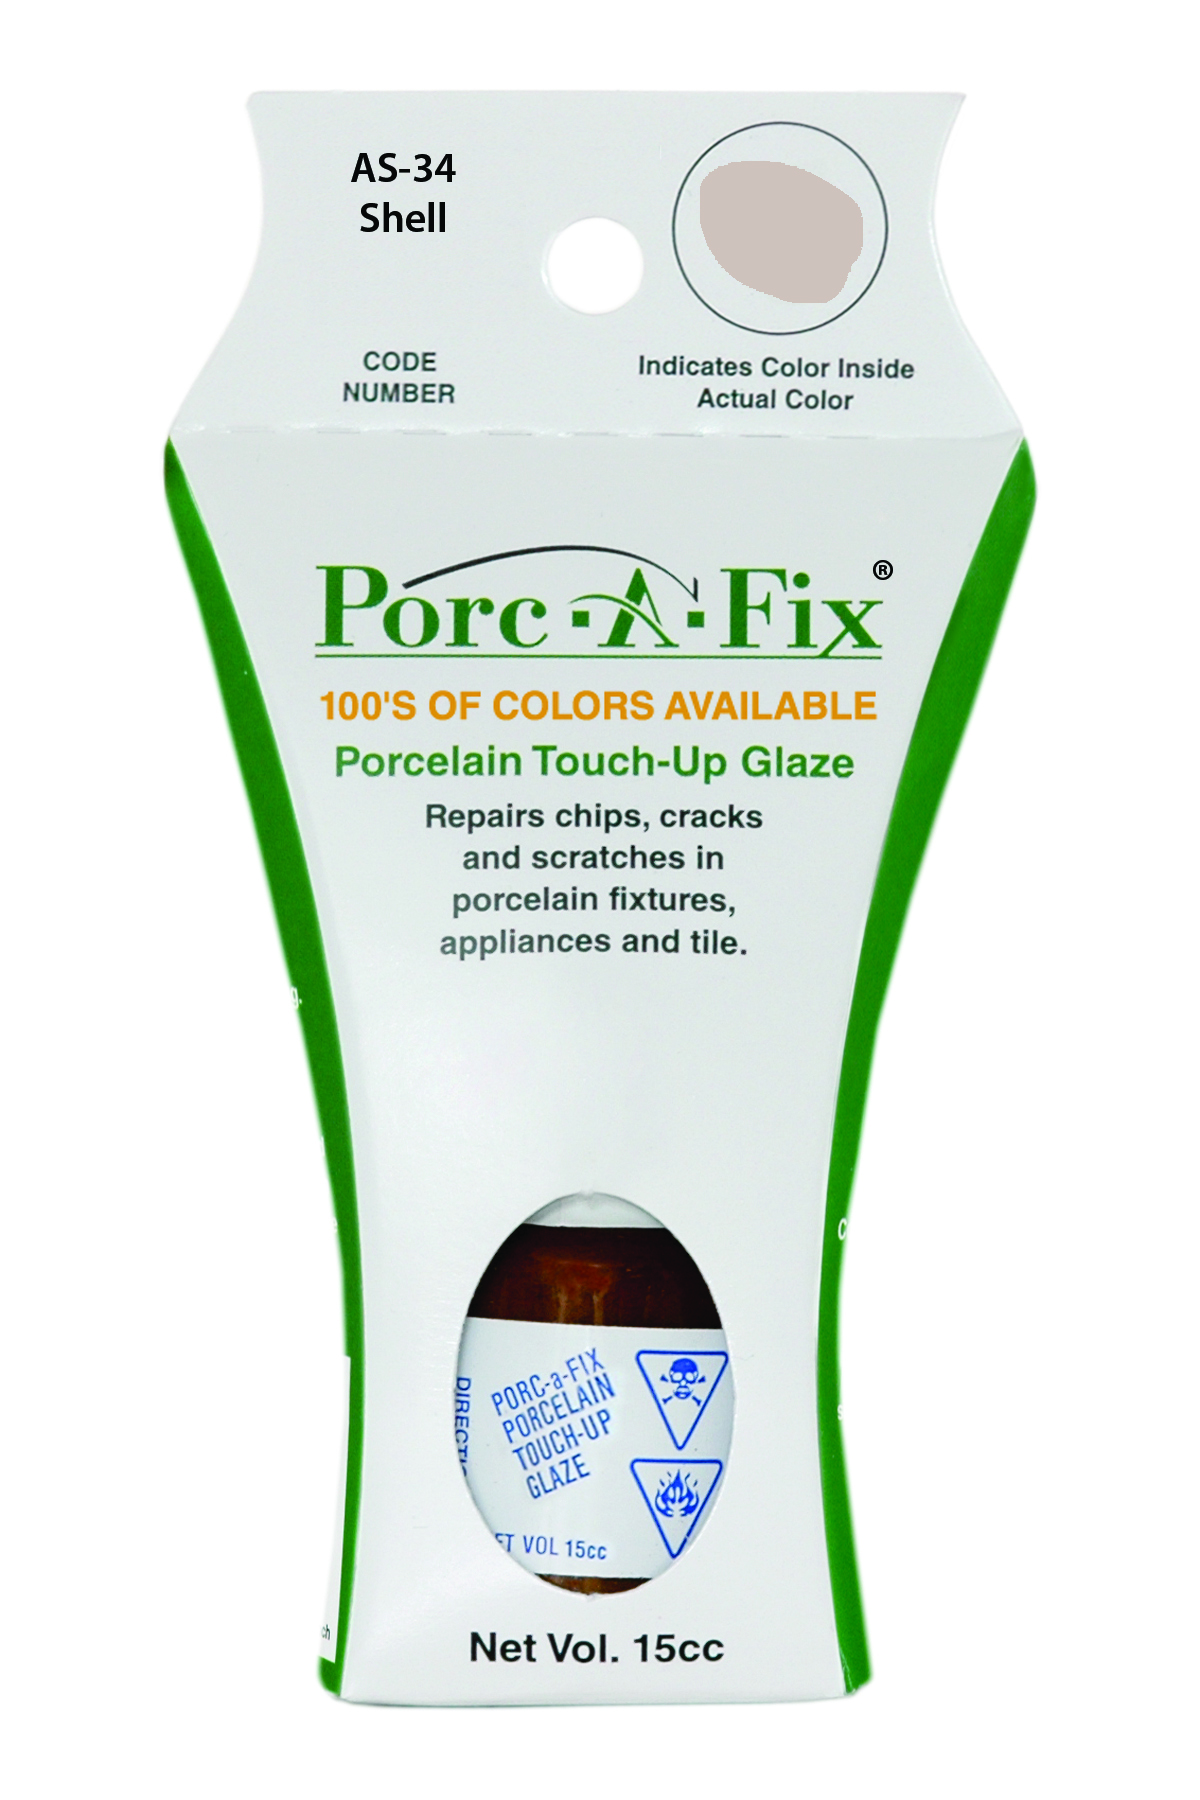 Fixture-Fix | AS-34 | Porc-A-Fix Touch-Up Glaze American Standard Shell - Compatible with American Standard 070900-1730A Touch Up Paint Kit - SHELL